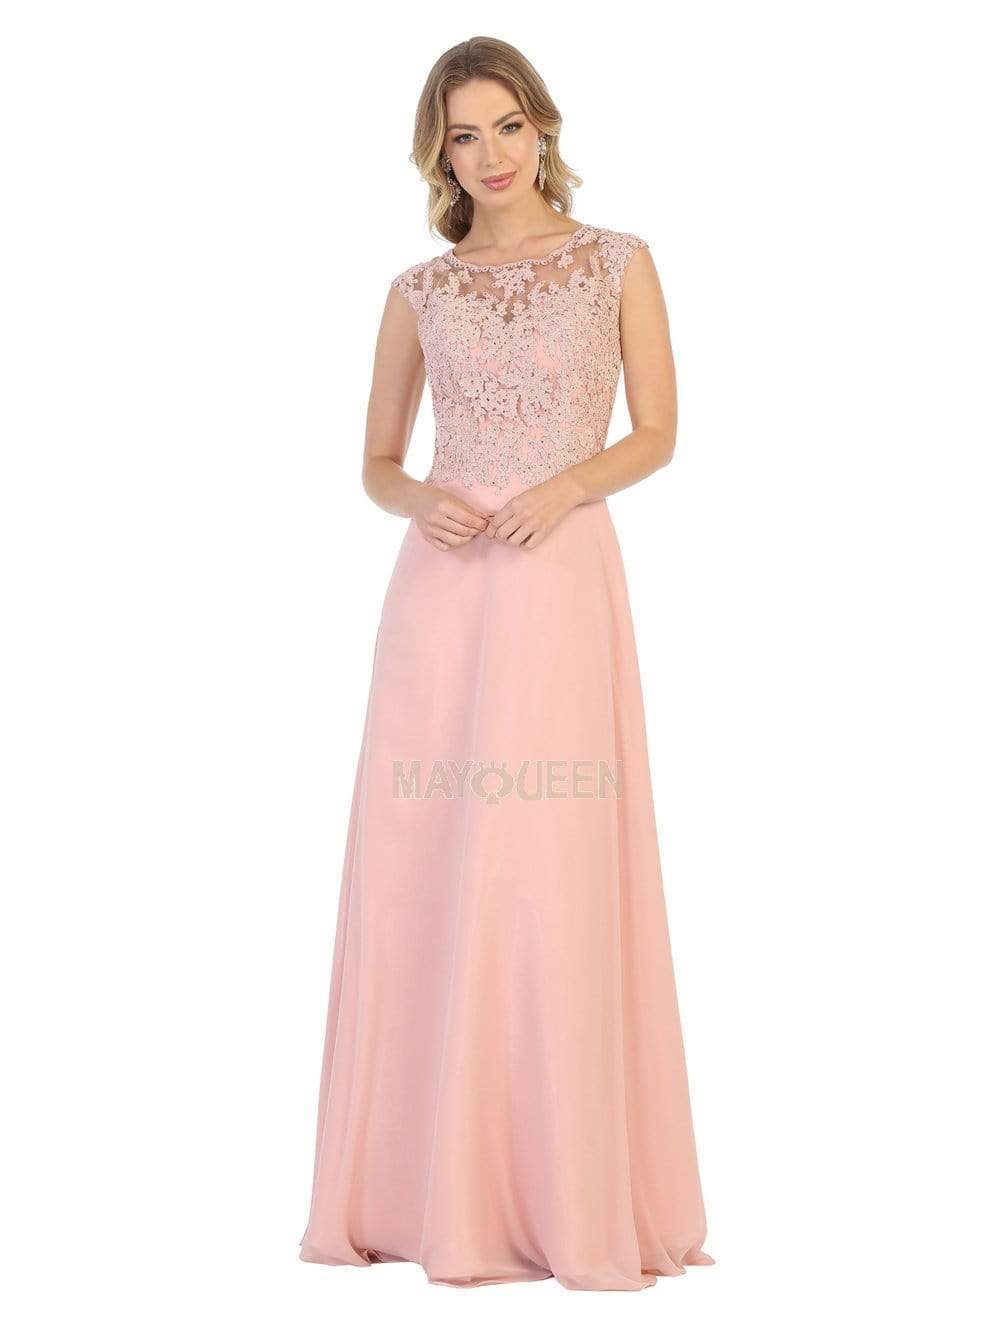 May Queen - MQ1725 Lace Bodice Chiffon A-Line Long Formal Dress Mother of the Bride Dresses 4 / Dusty-Rose